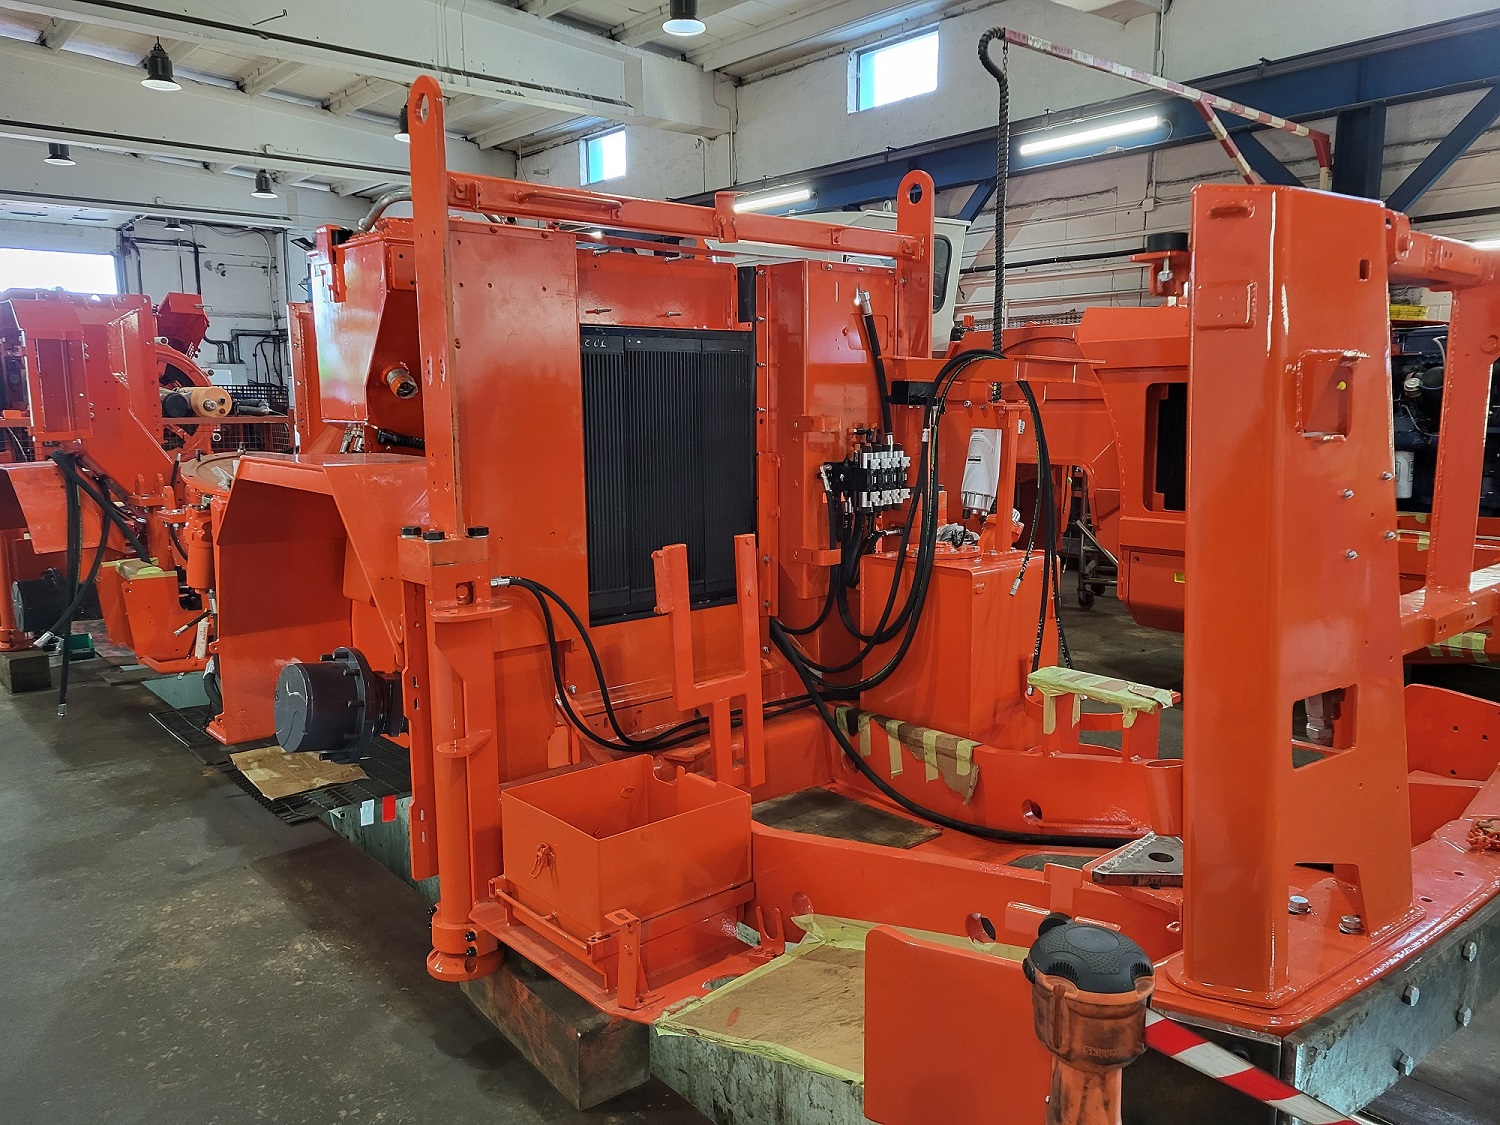 Fully Rebuilt Sandvik Dd421 60c Available October 2022 Qme Global Mining And Tunnelling